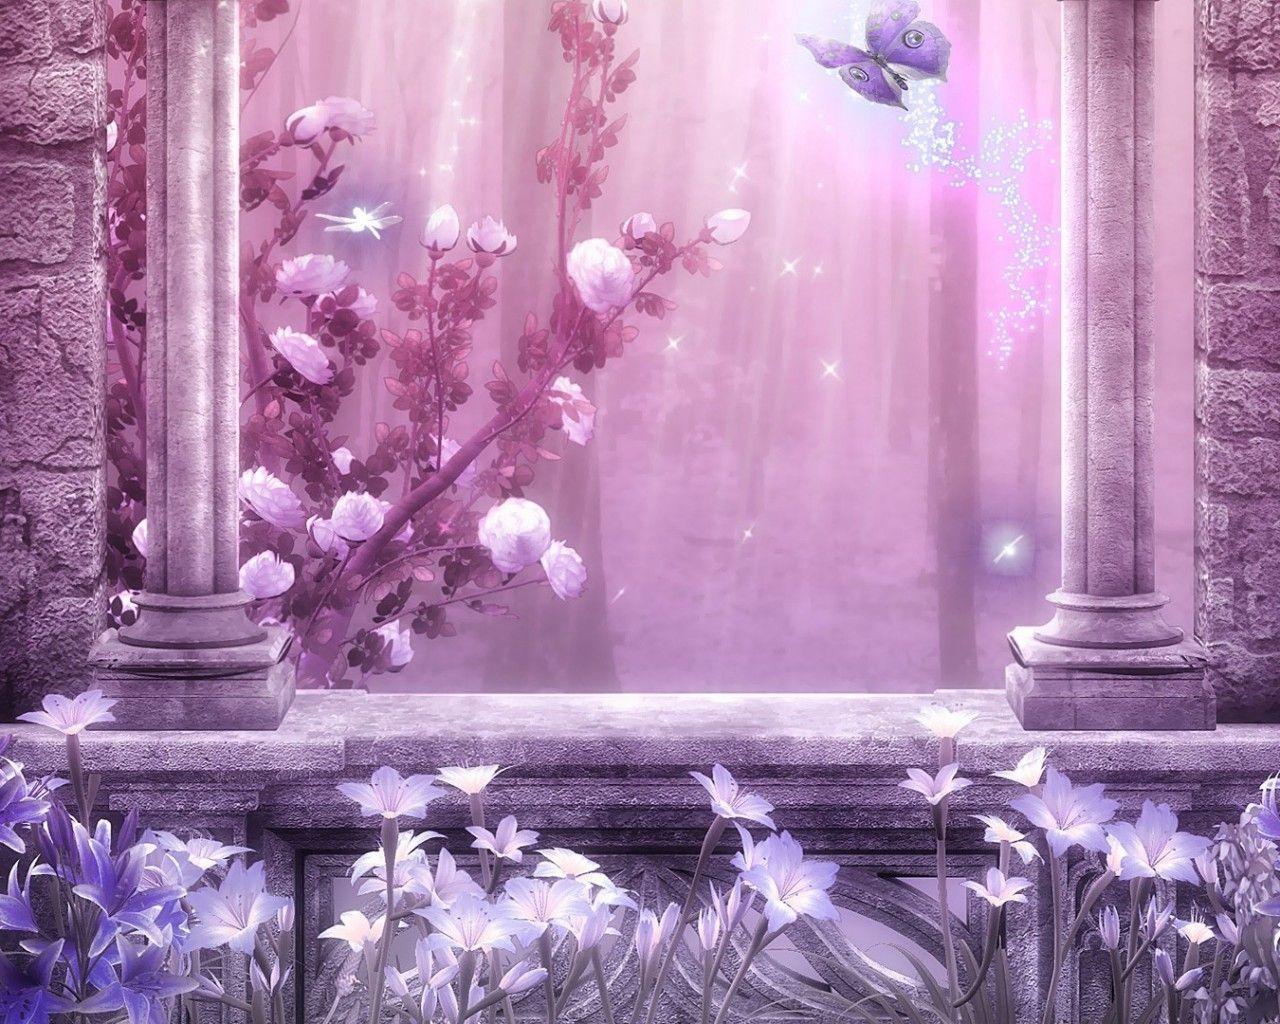 Pink Mystic, butterfly, columns, curtain, fantasy, flowers